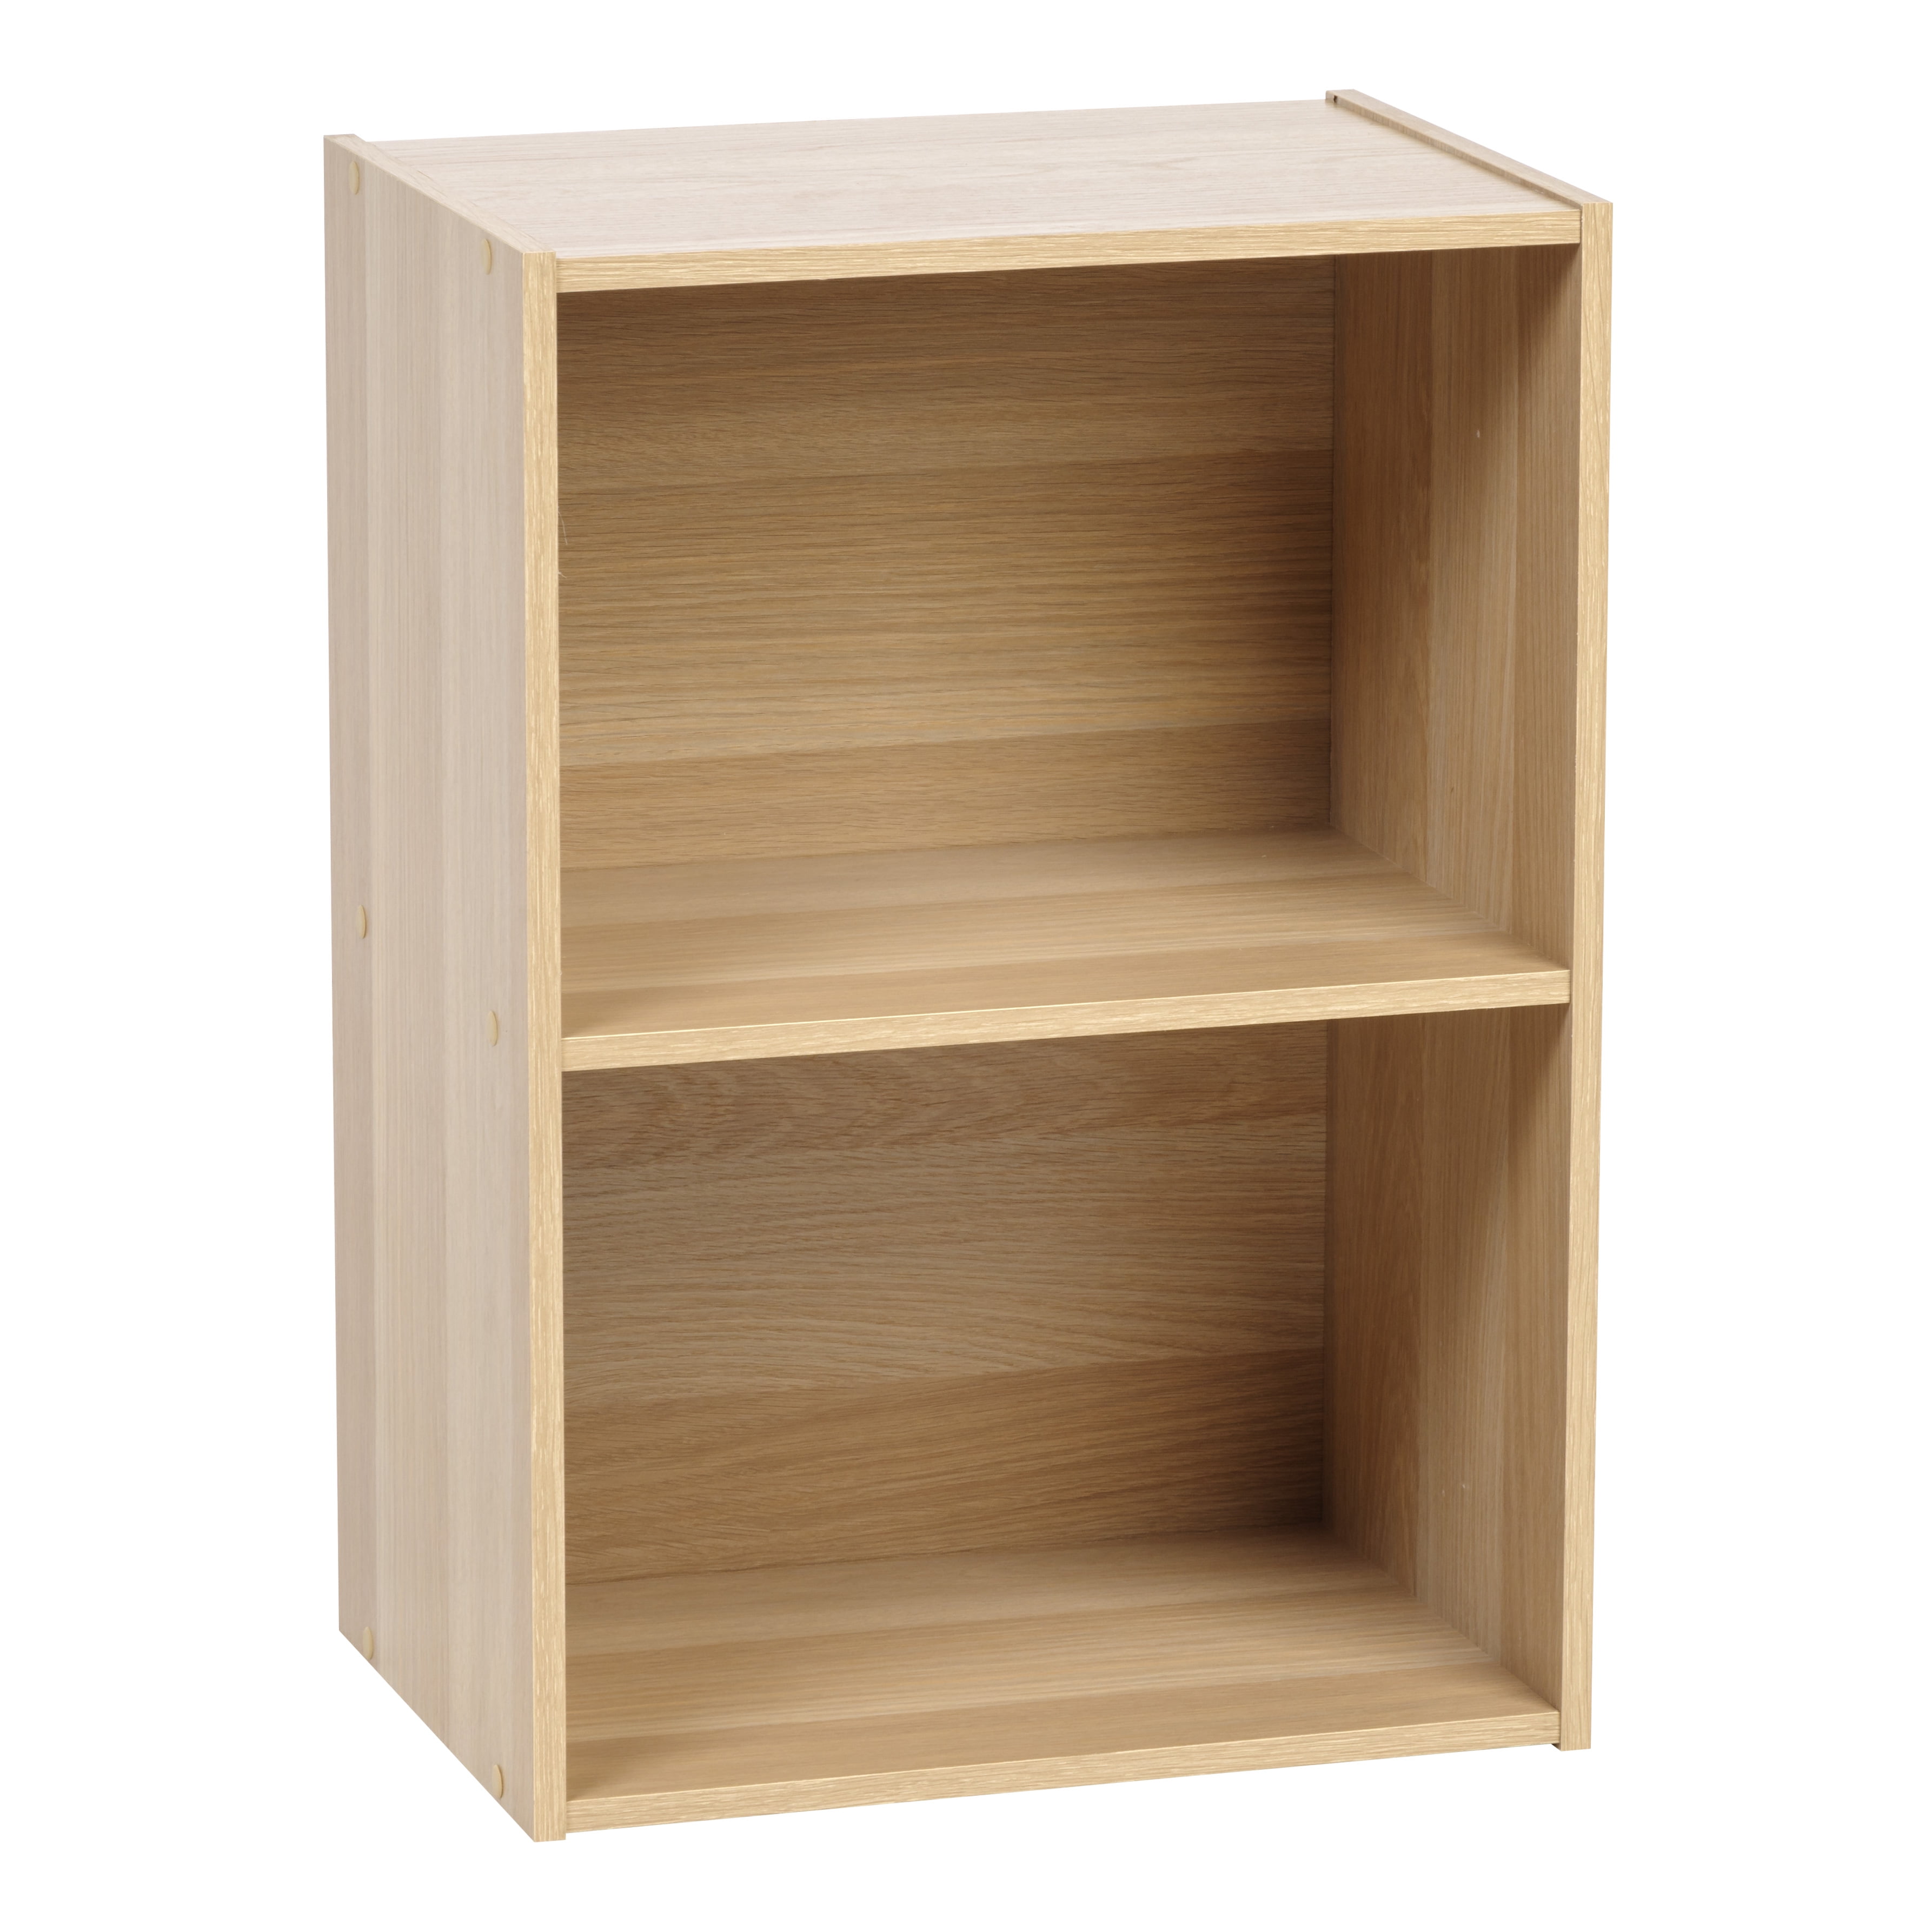 New Double Sided Bookcase Bookshelf Storage Unit Wooden Quick Delivery 